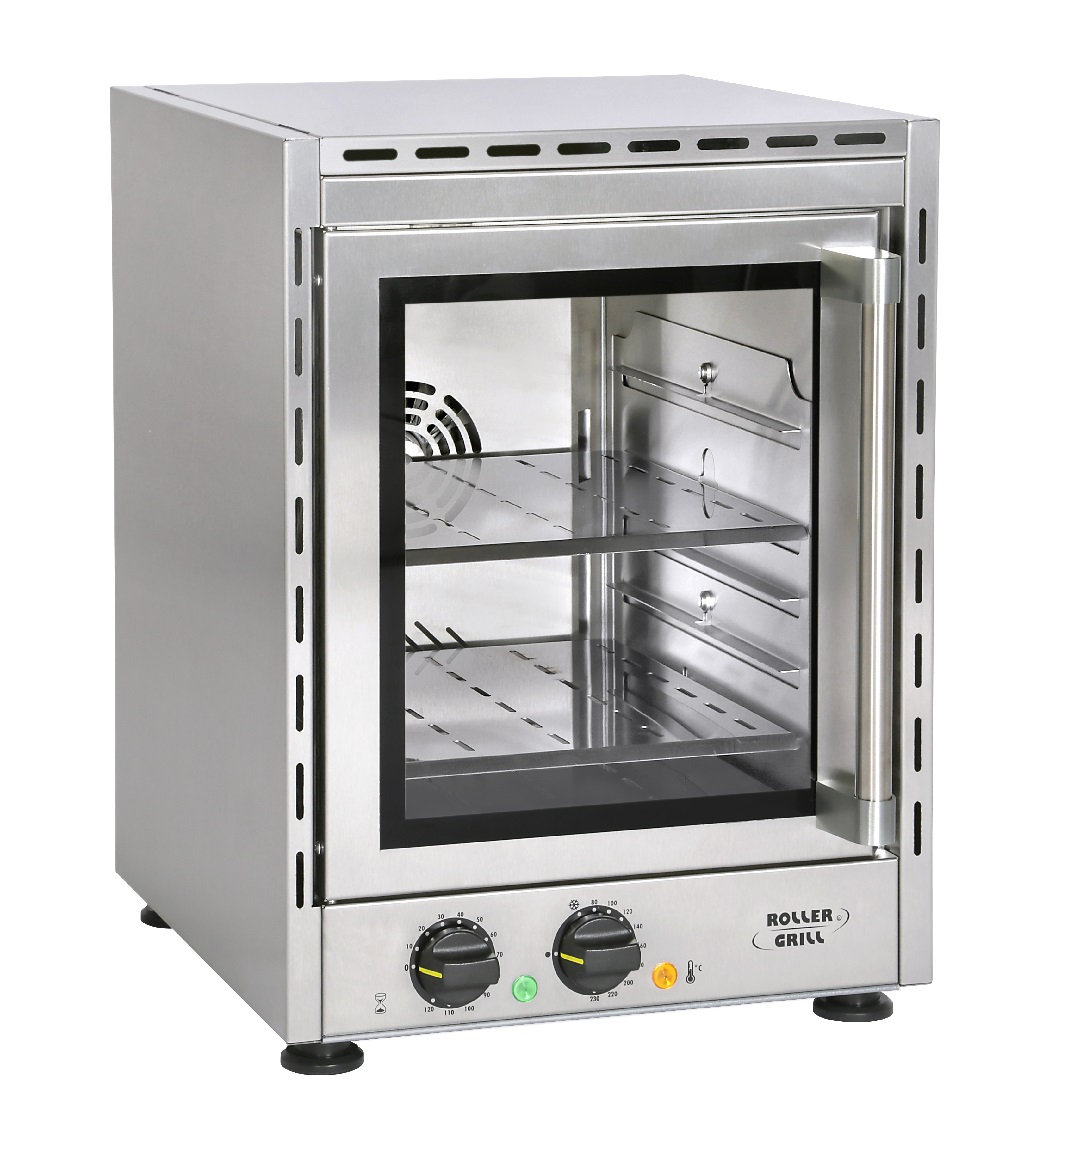 Roller Grill FCV 280 Upright Mini Convection Oven